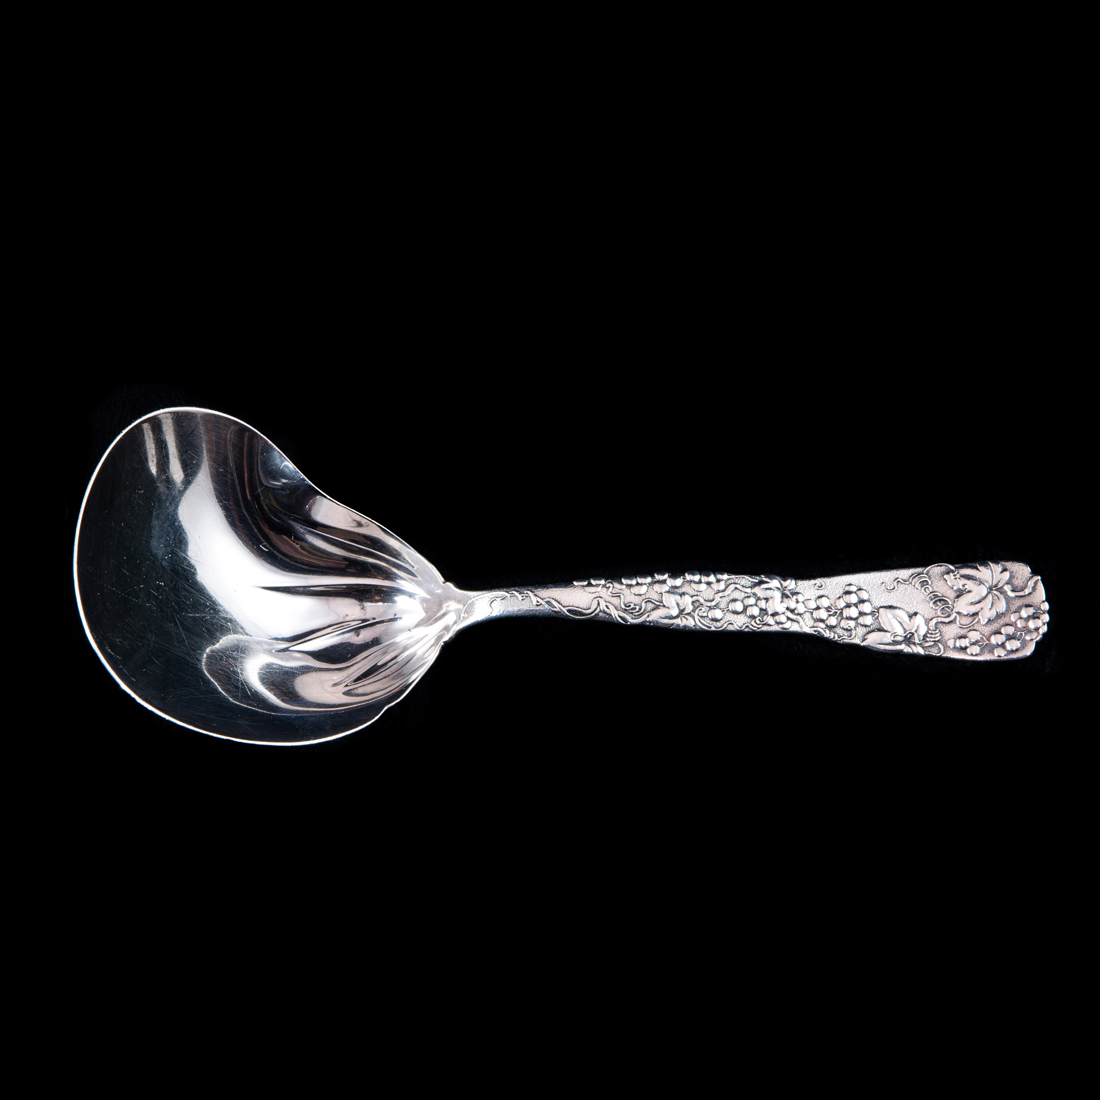 A TIFFANY VINE CASSEROLE SPOON WITH